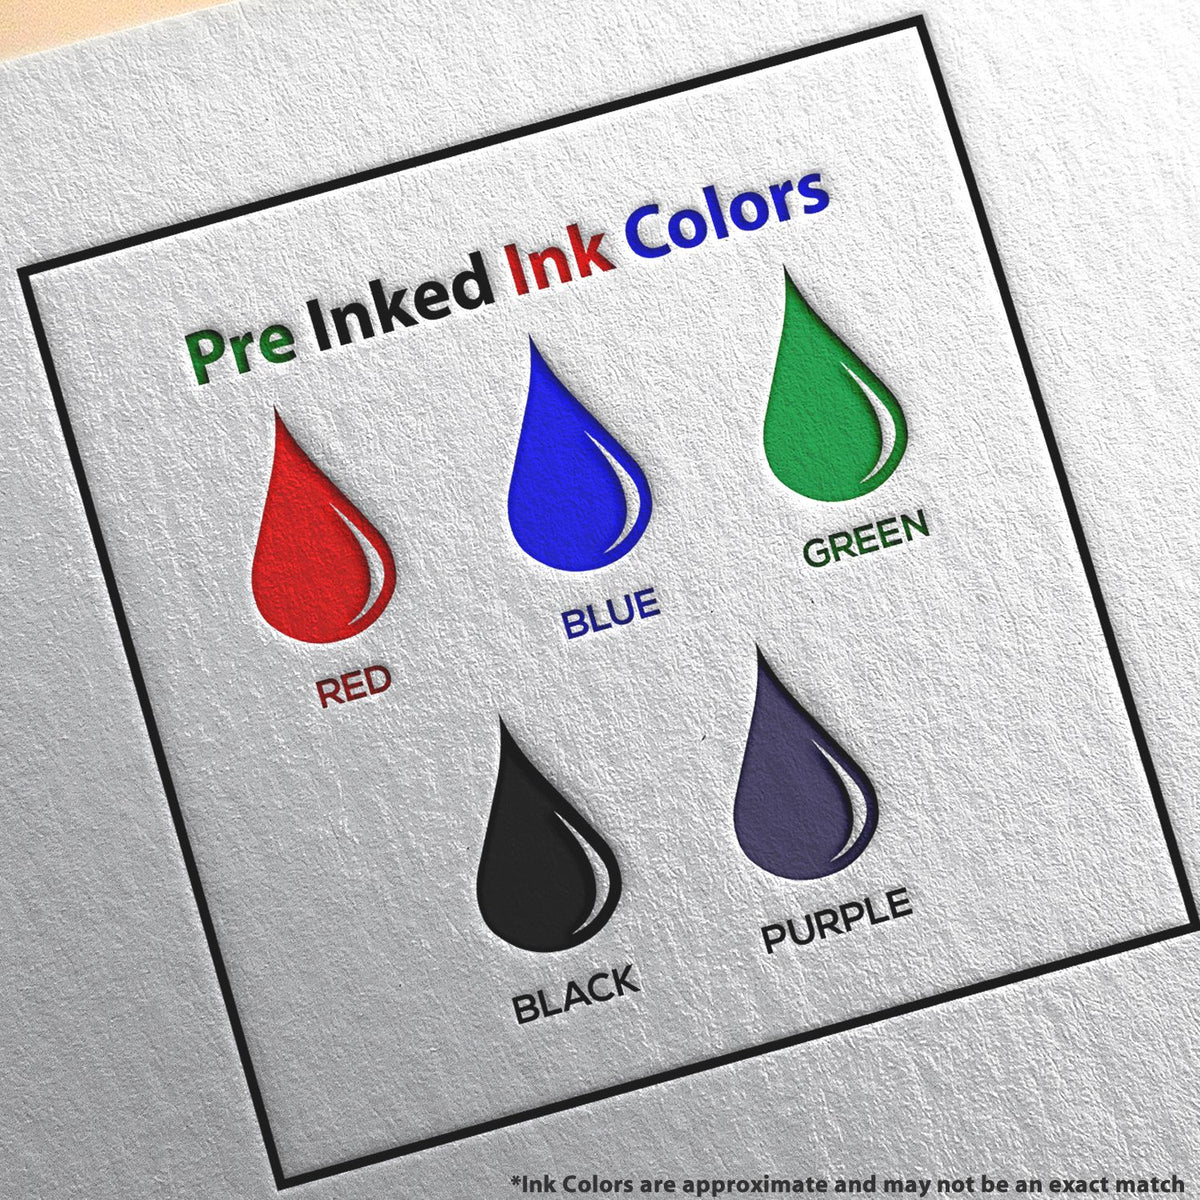 A picture showing the different ink colors or hues available for the Slim Pre-Inked Louisiana Professional Engineer Seal Stamp product.